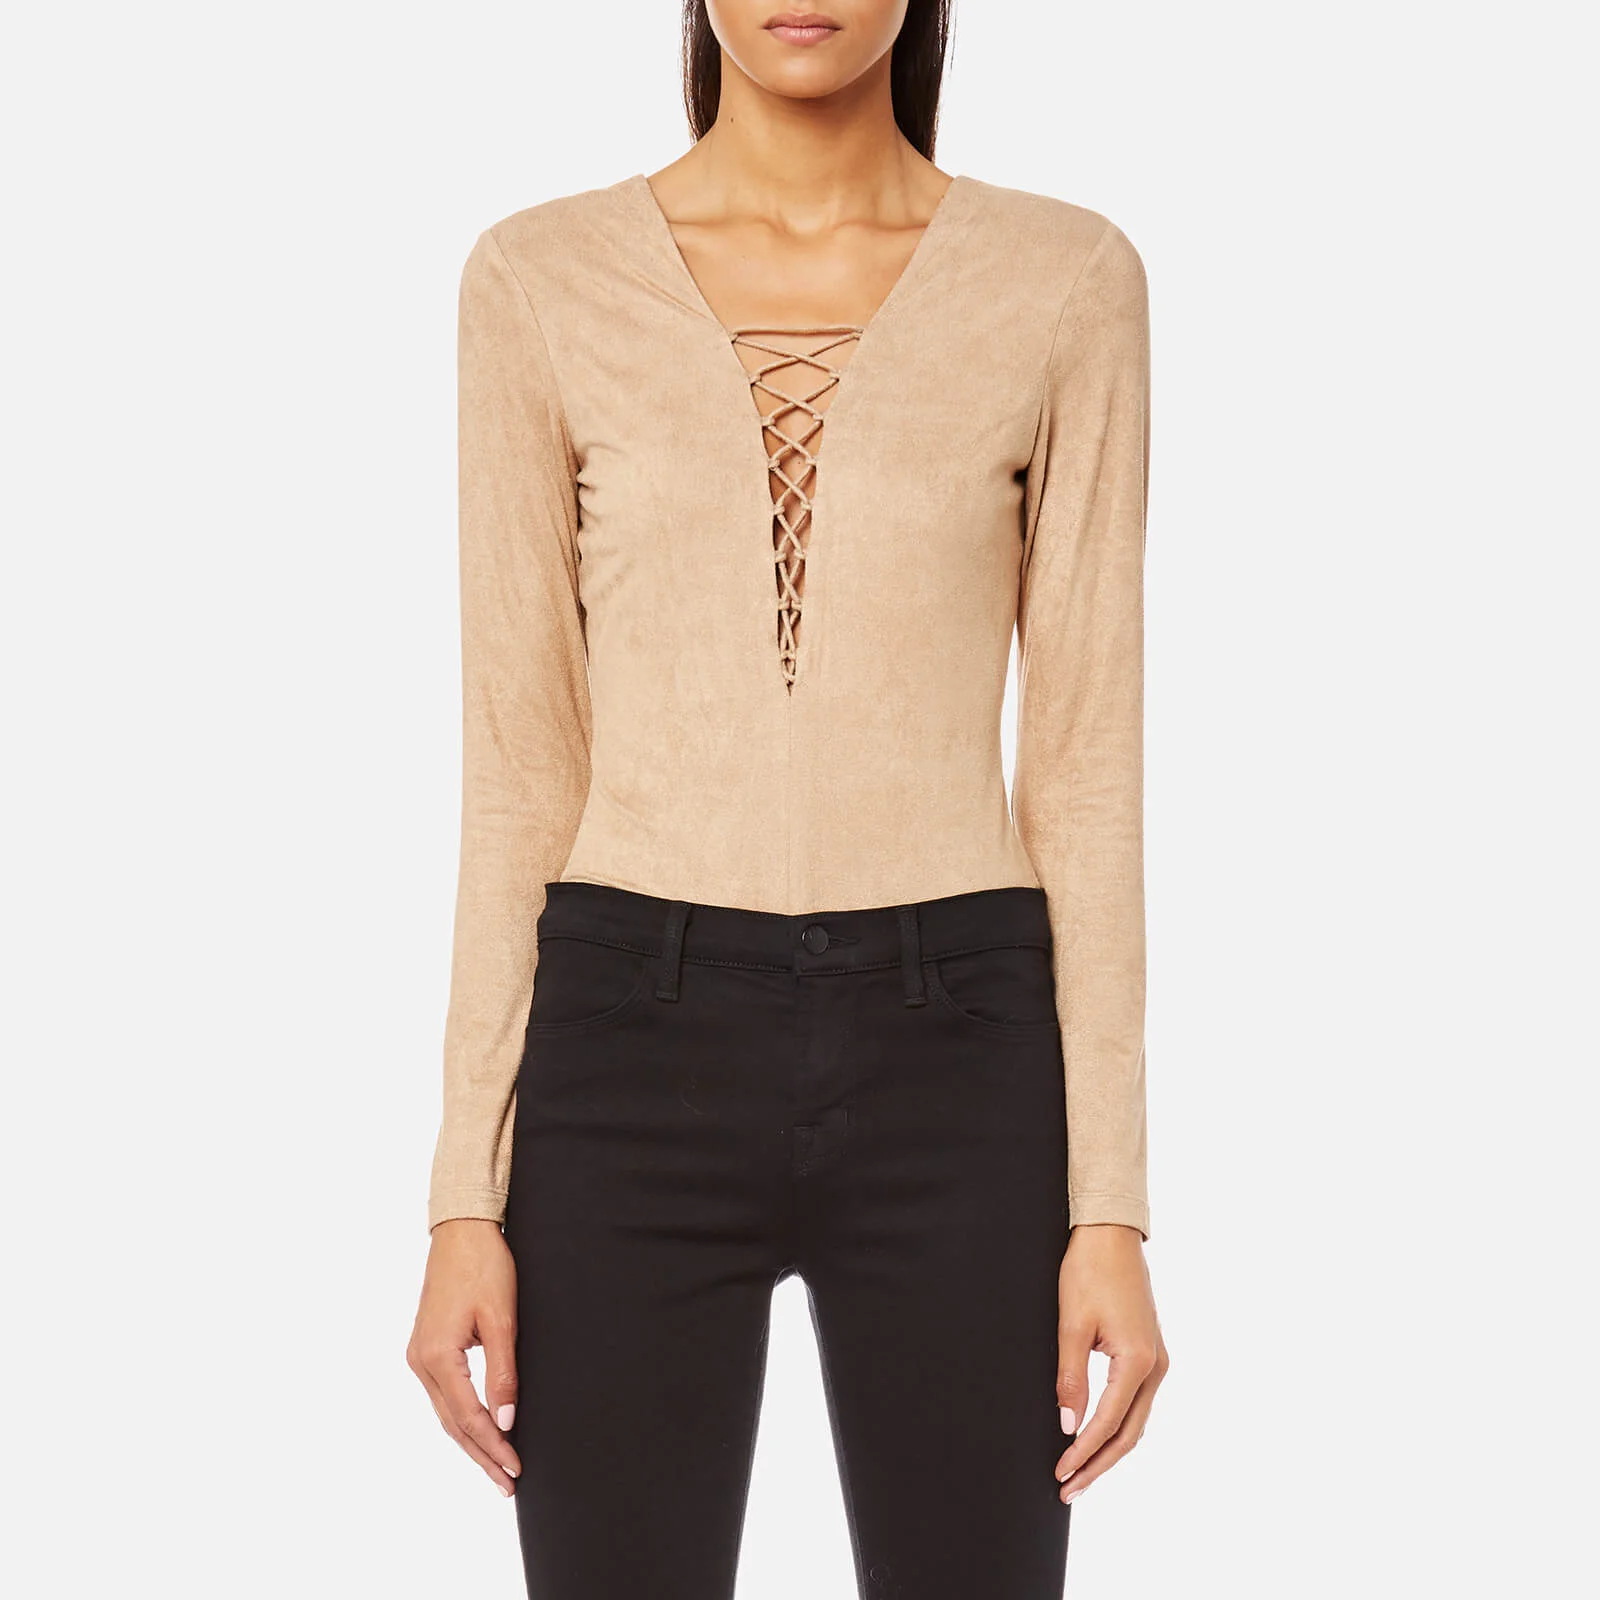 T by Alexander Wang Women's Stretch Faux Suede Lace Up Bodysuit - Camel Image 1